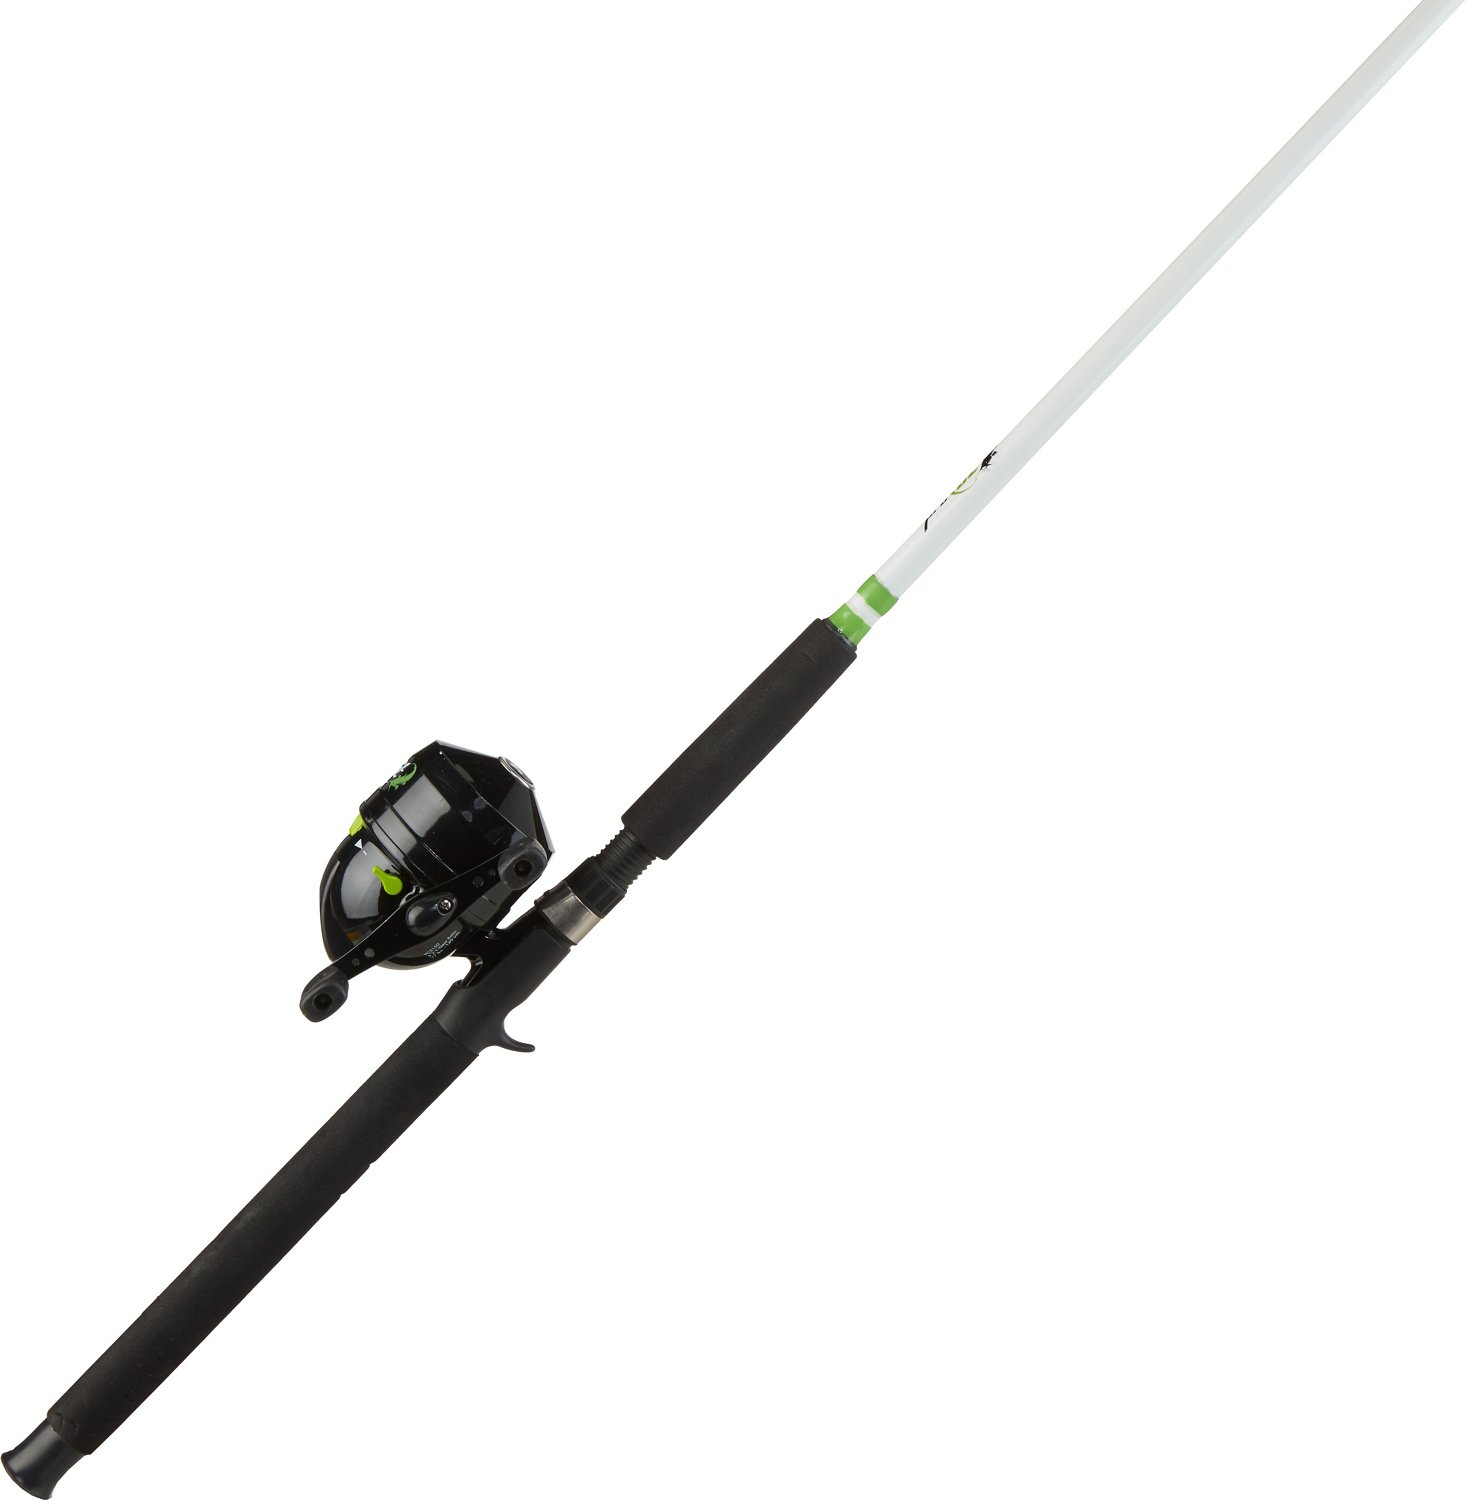 pro cat fishing rod - Online Exclusive Rate- OFF 73%